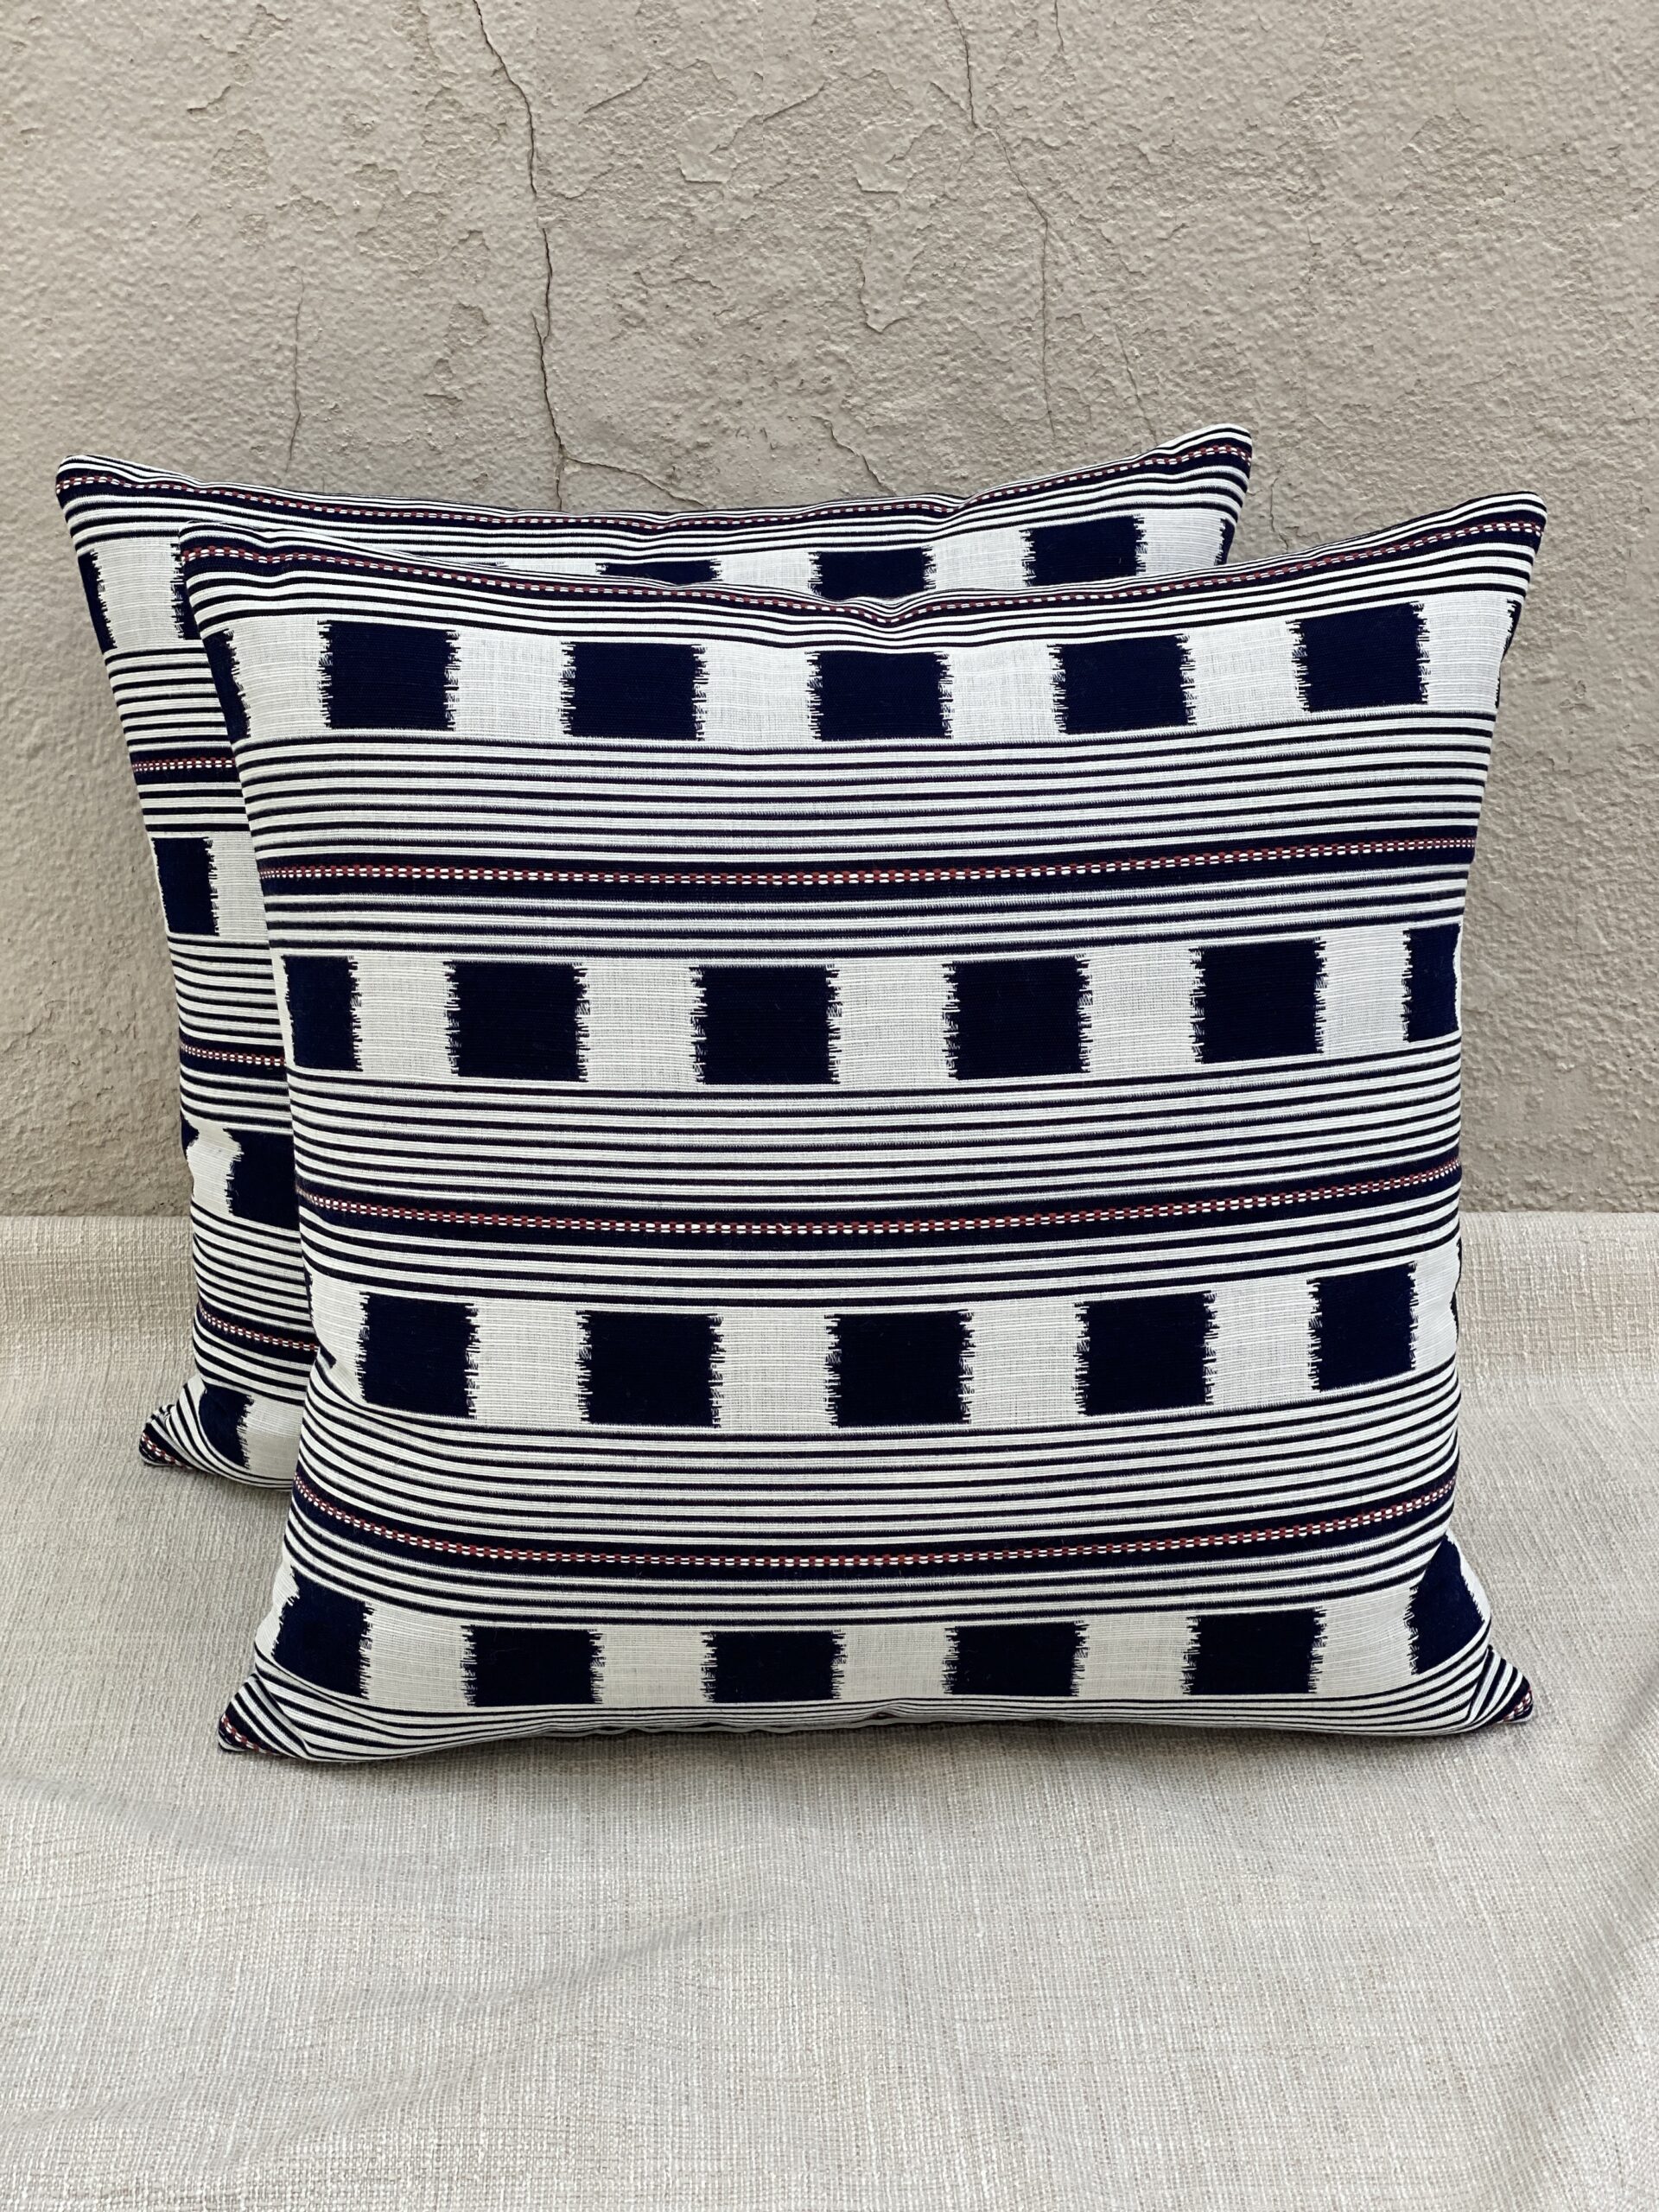 Christopher Farr Cloth Lost and Found Pillows